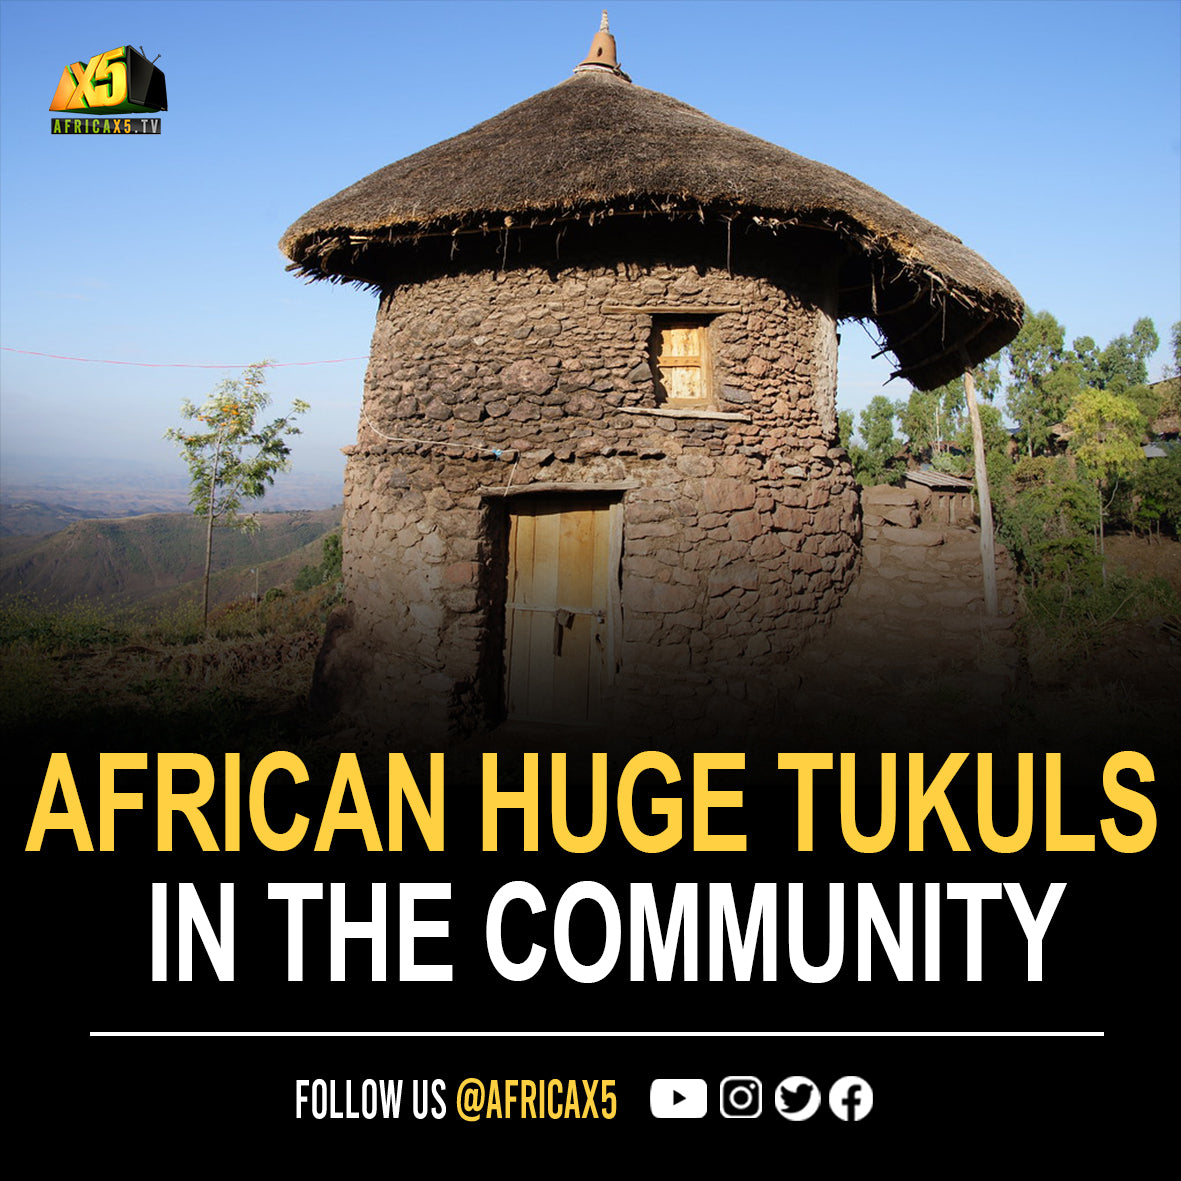 The African huge tukul serves as a versatile and essential hub within the community, fulfilling various practical and cultural roles.